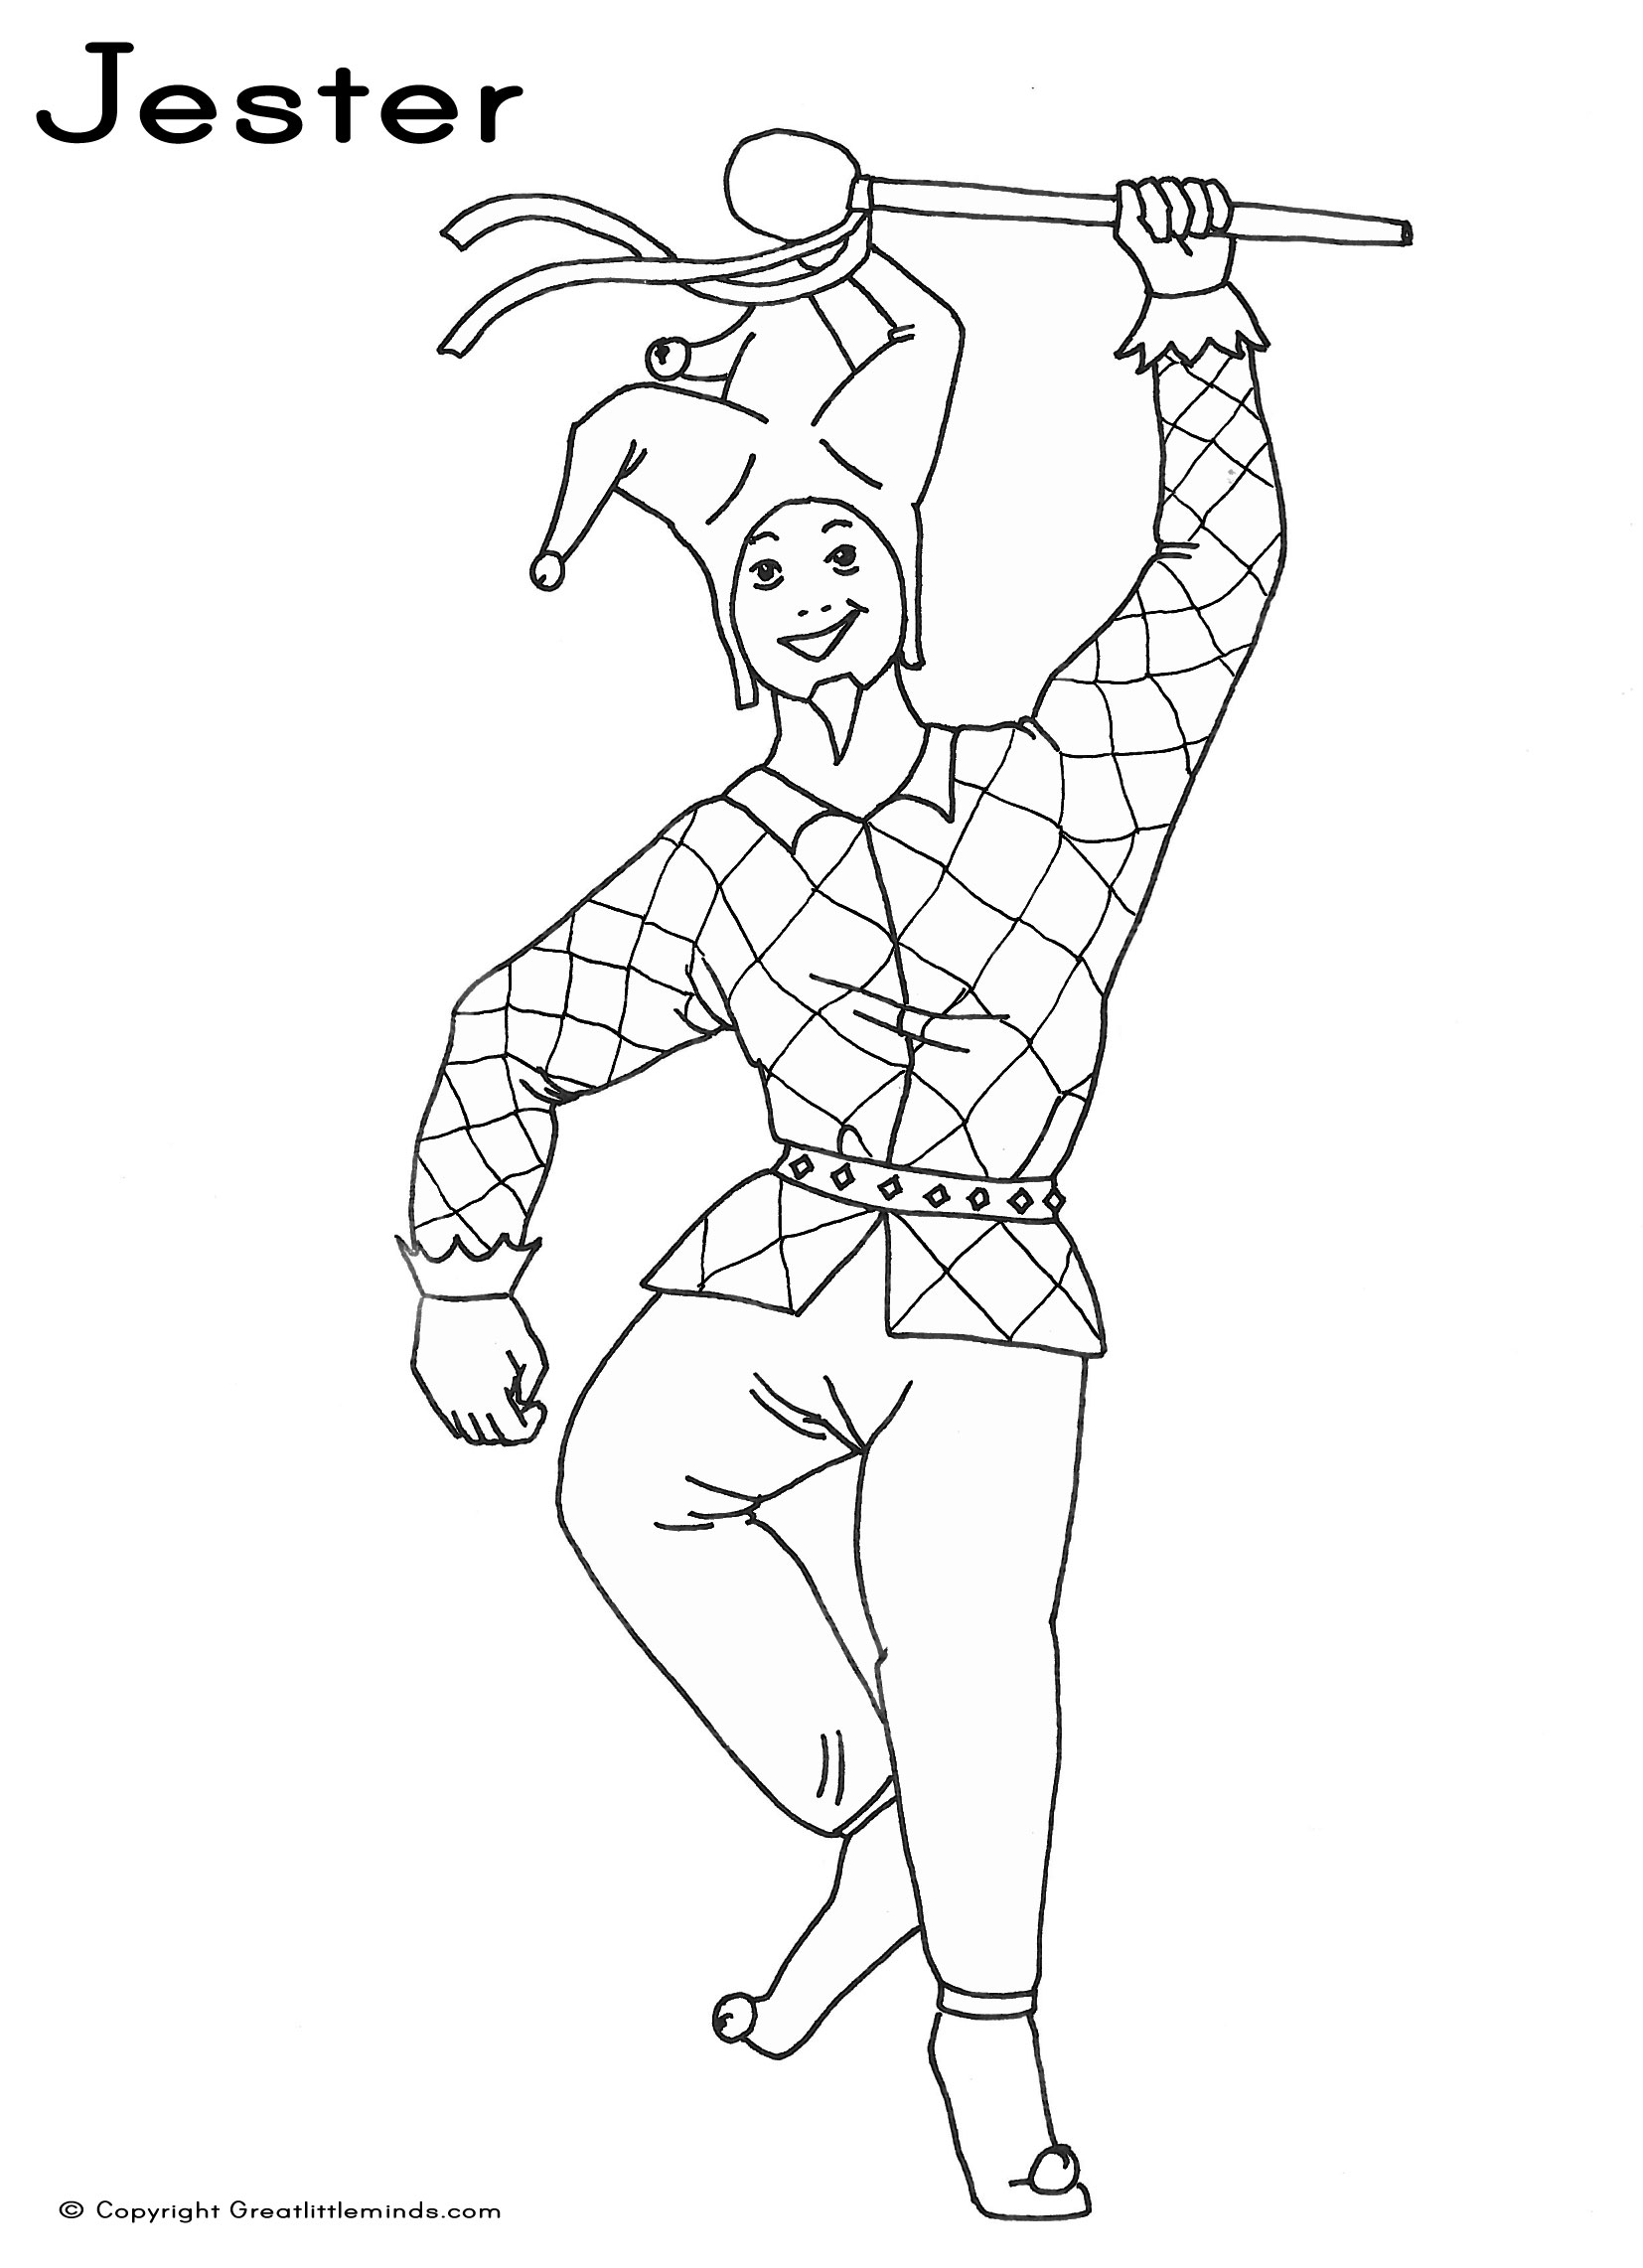 Drawing Jester #148639 (Characters) – Printable coloring pages